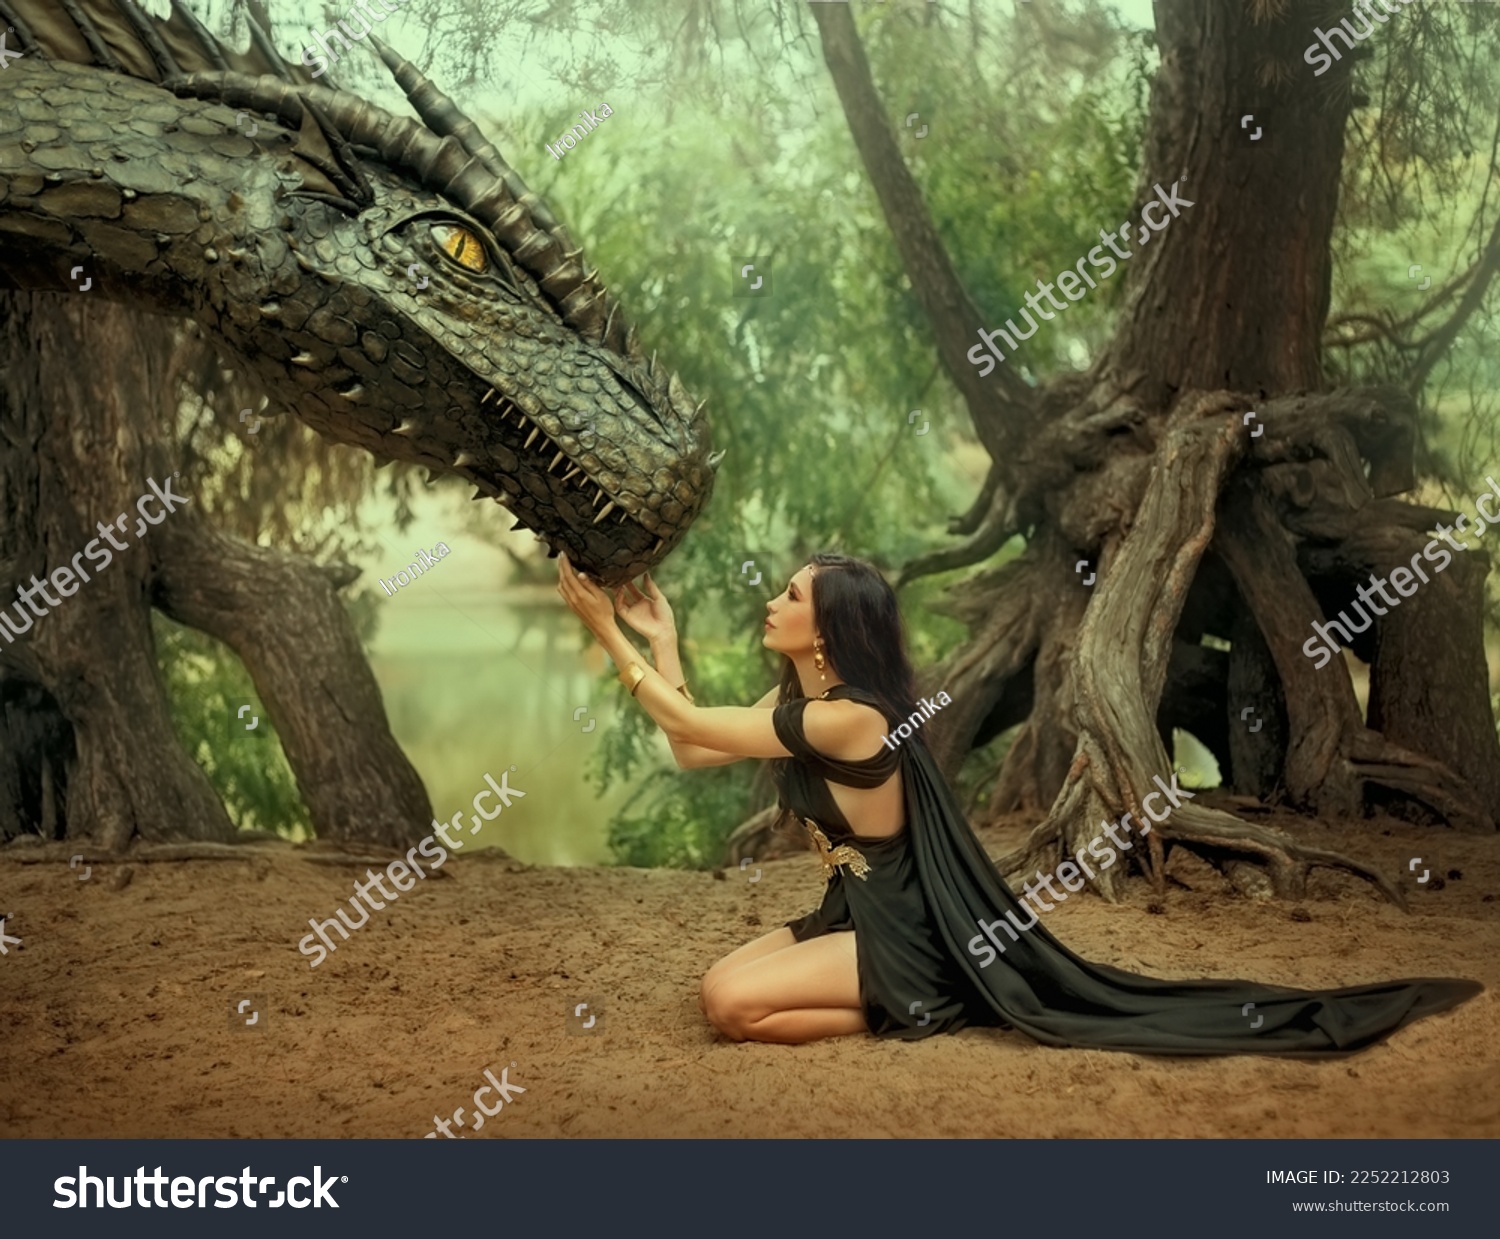 Fantasy woman elf queen touching with hands dragon head. Girl mistress tamed monster concept female power. black creative dress, girl princess fashion model sits on knees. Deep green forest trees. #2252212803